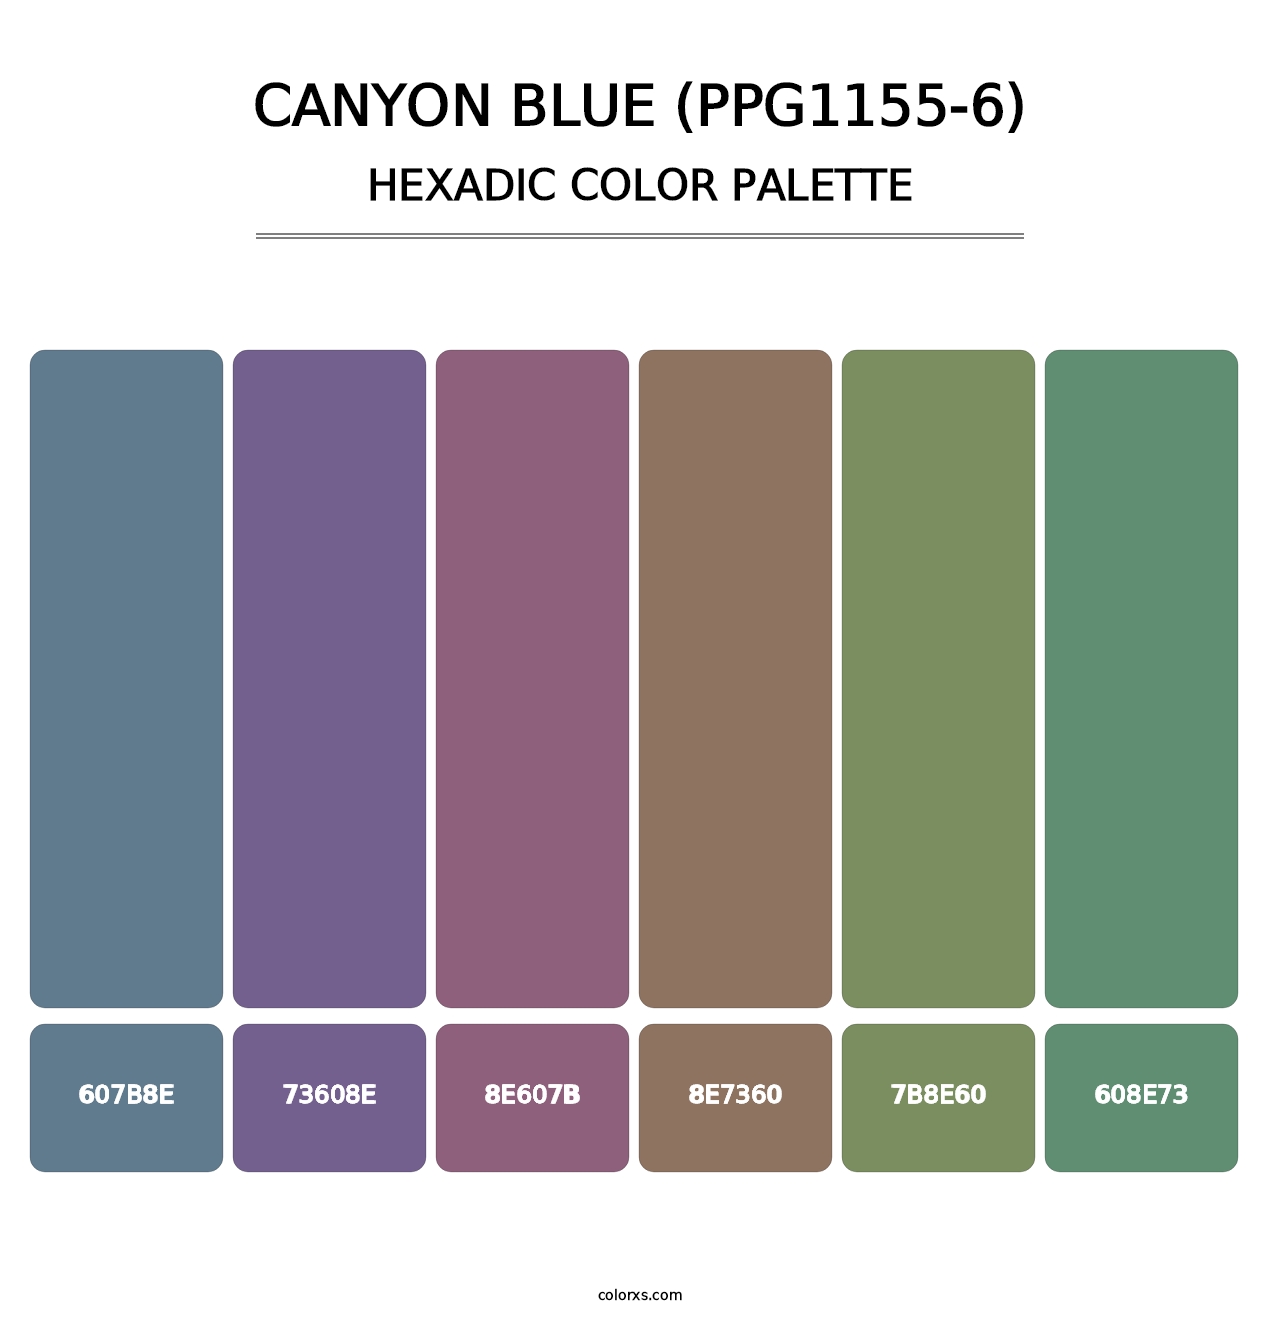 Canyon Blue (PPG1155-6) - Hexadic Color Palette